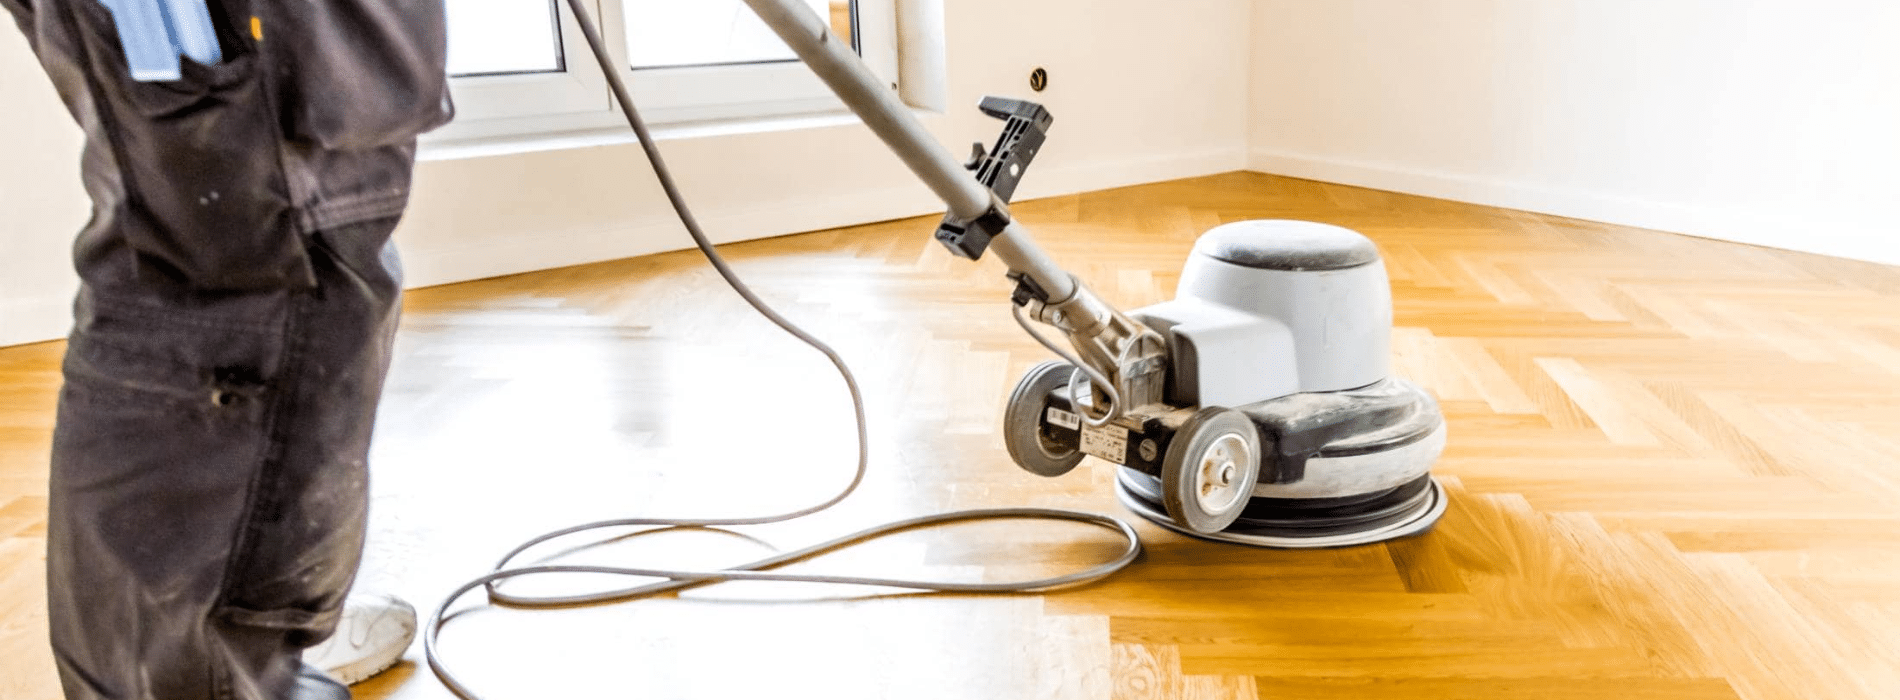 In South Kensington, SW7, Mr Sander® use a Bona FlexiSand 1.5 buffer sander with a dimension of Ø 407 mm, 1.9 kW effect, 230 V voltage, and 50 Hz/60 Hz frequency. They connect it to a dust extraction system with a HEPA filter for a clean and efficient result.